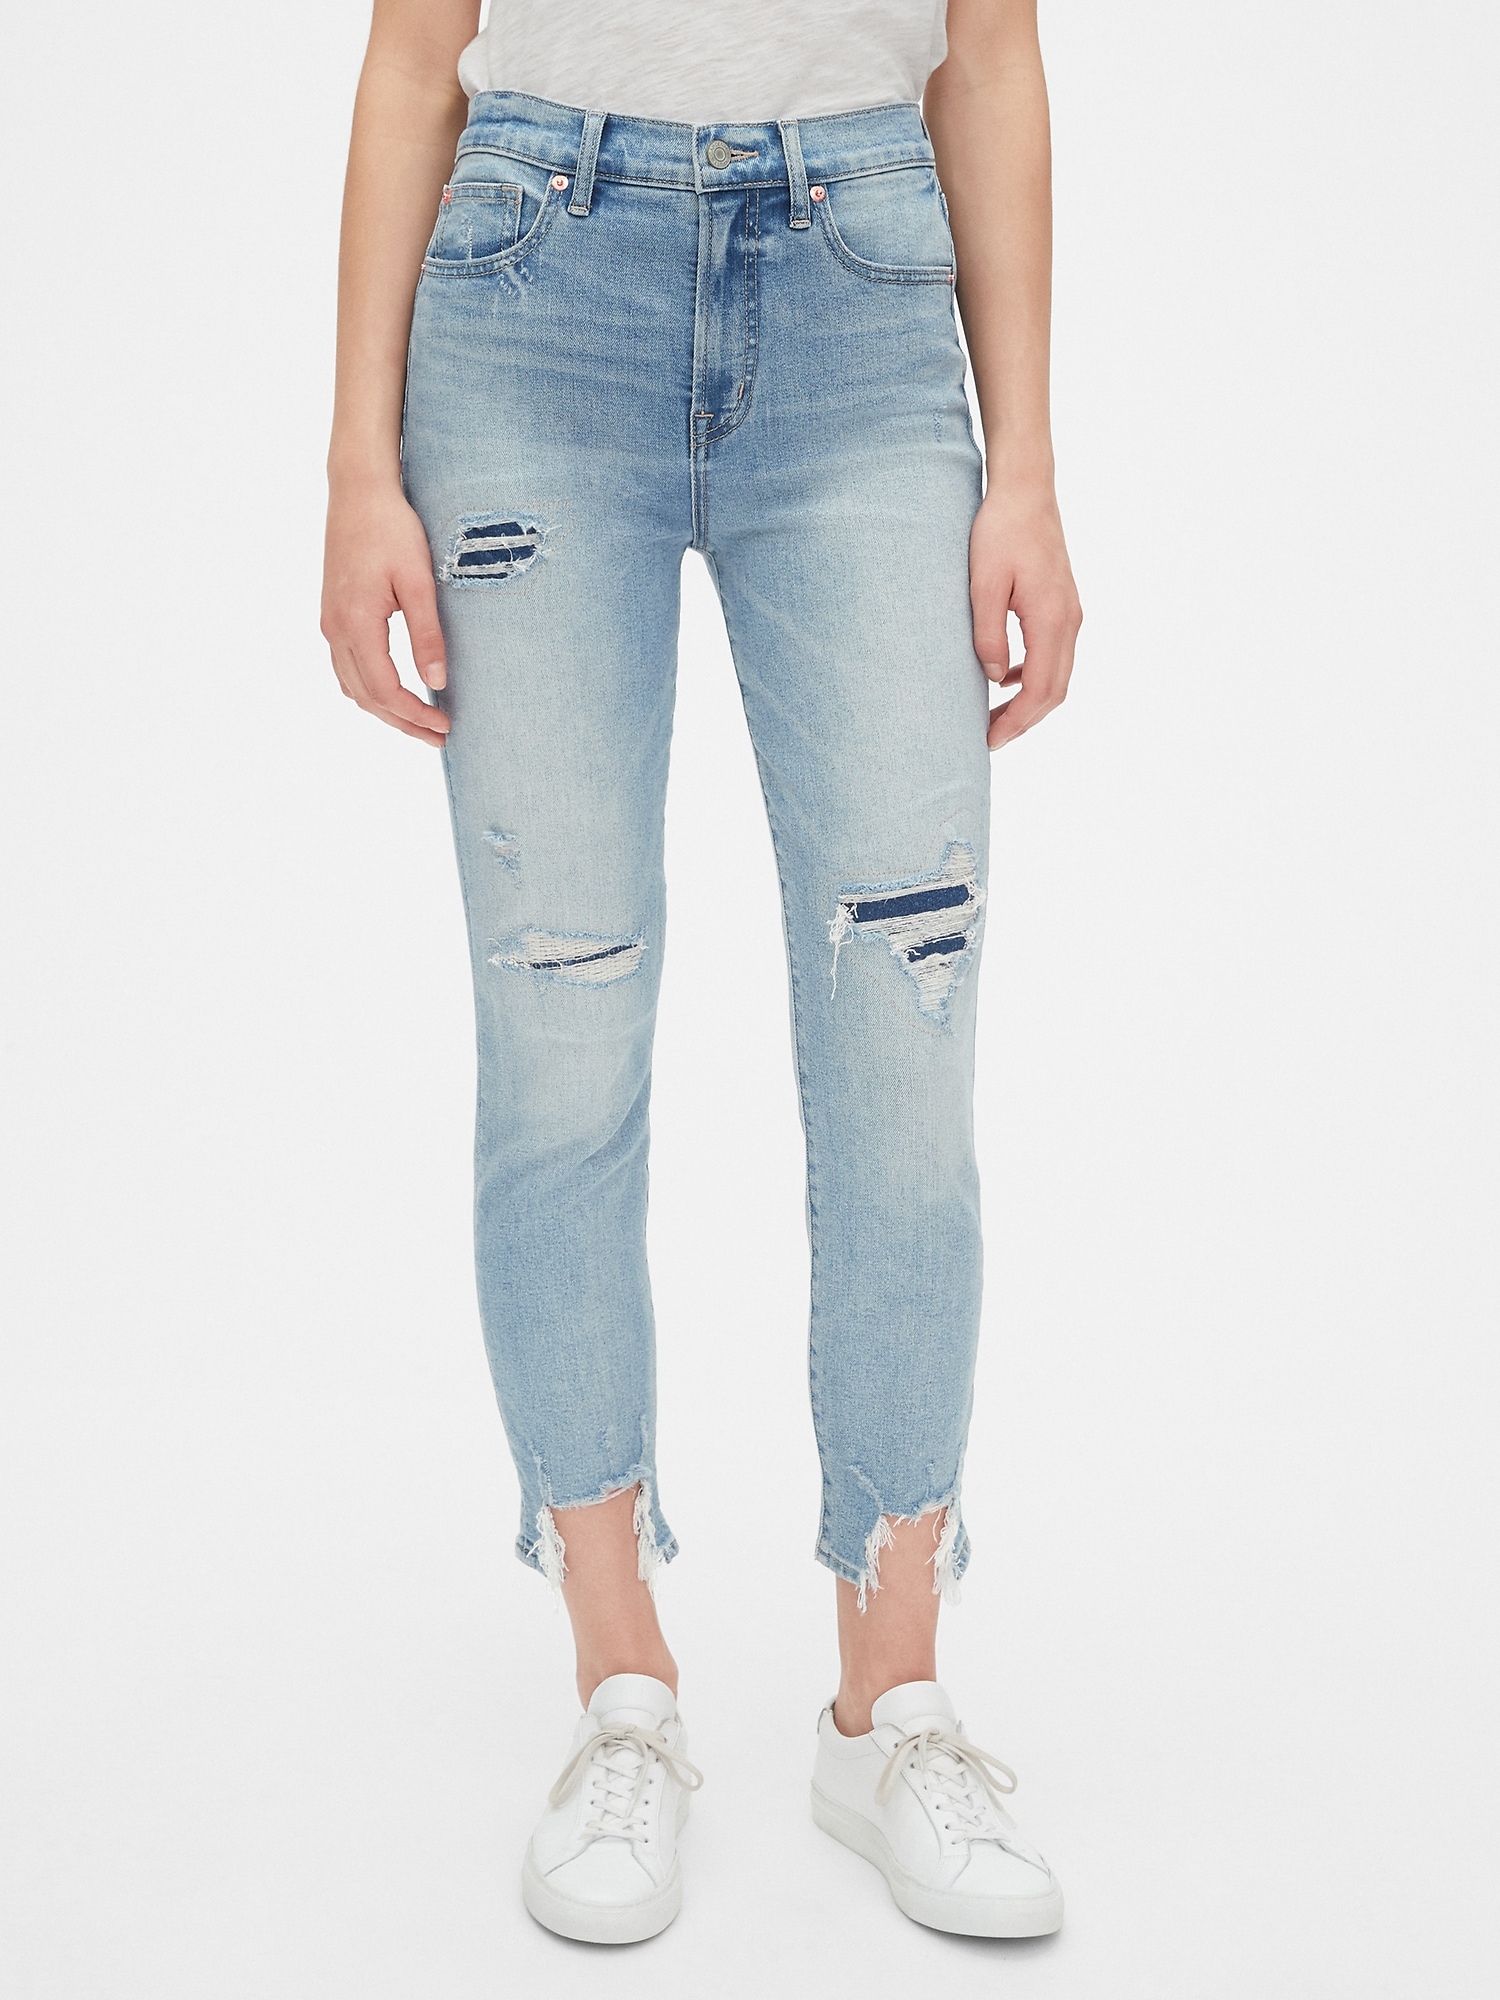 distressed jeans at ankle